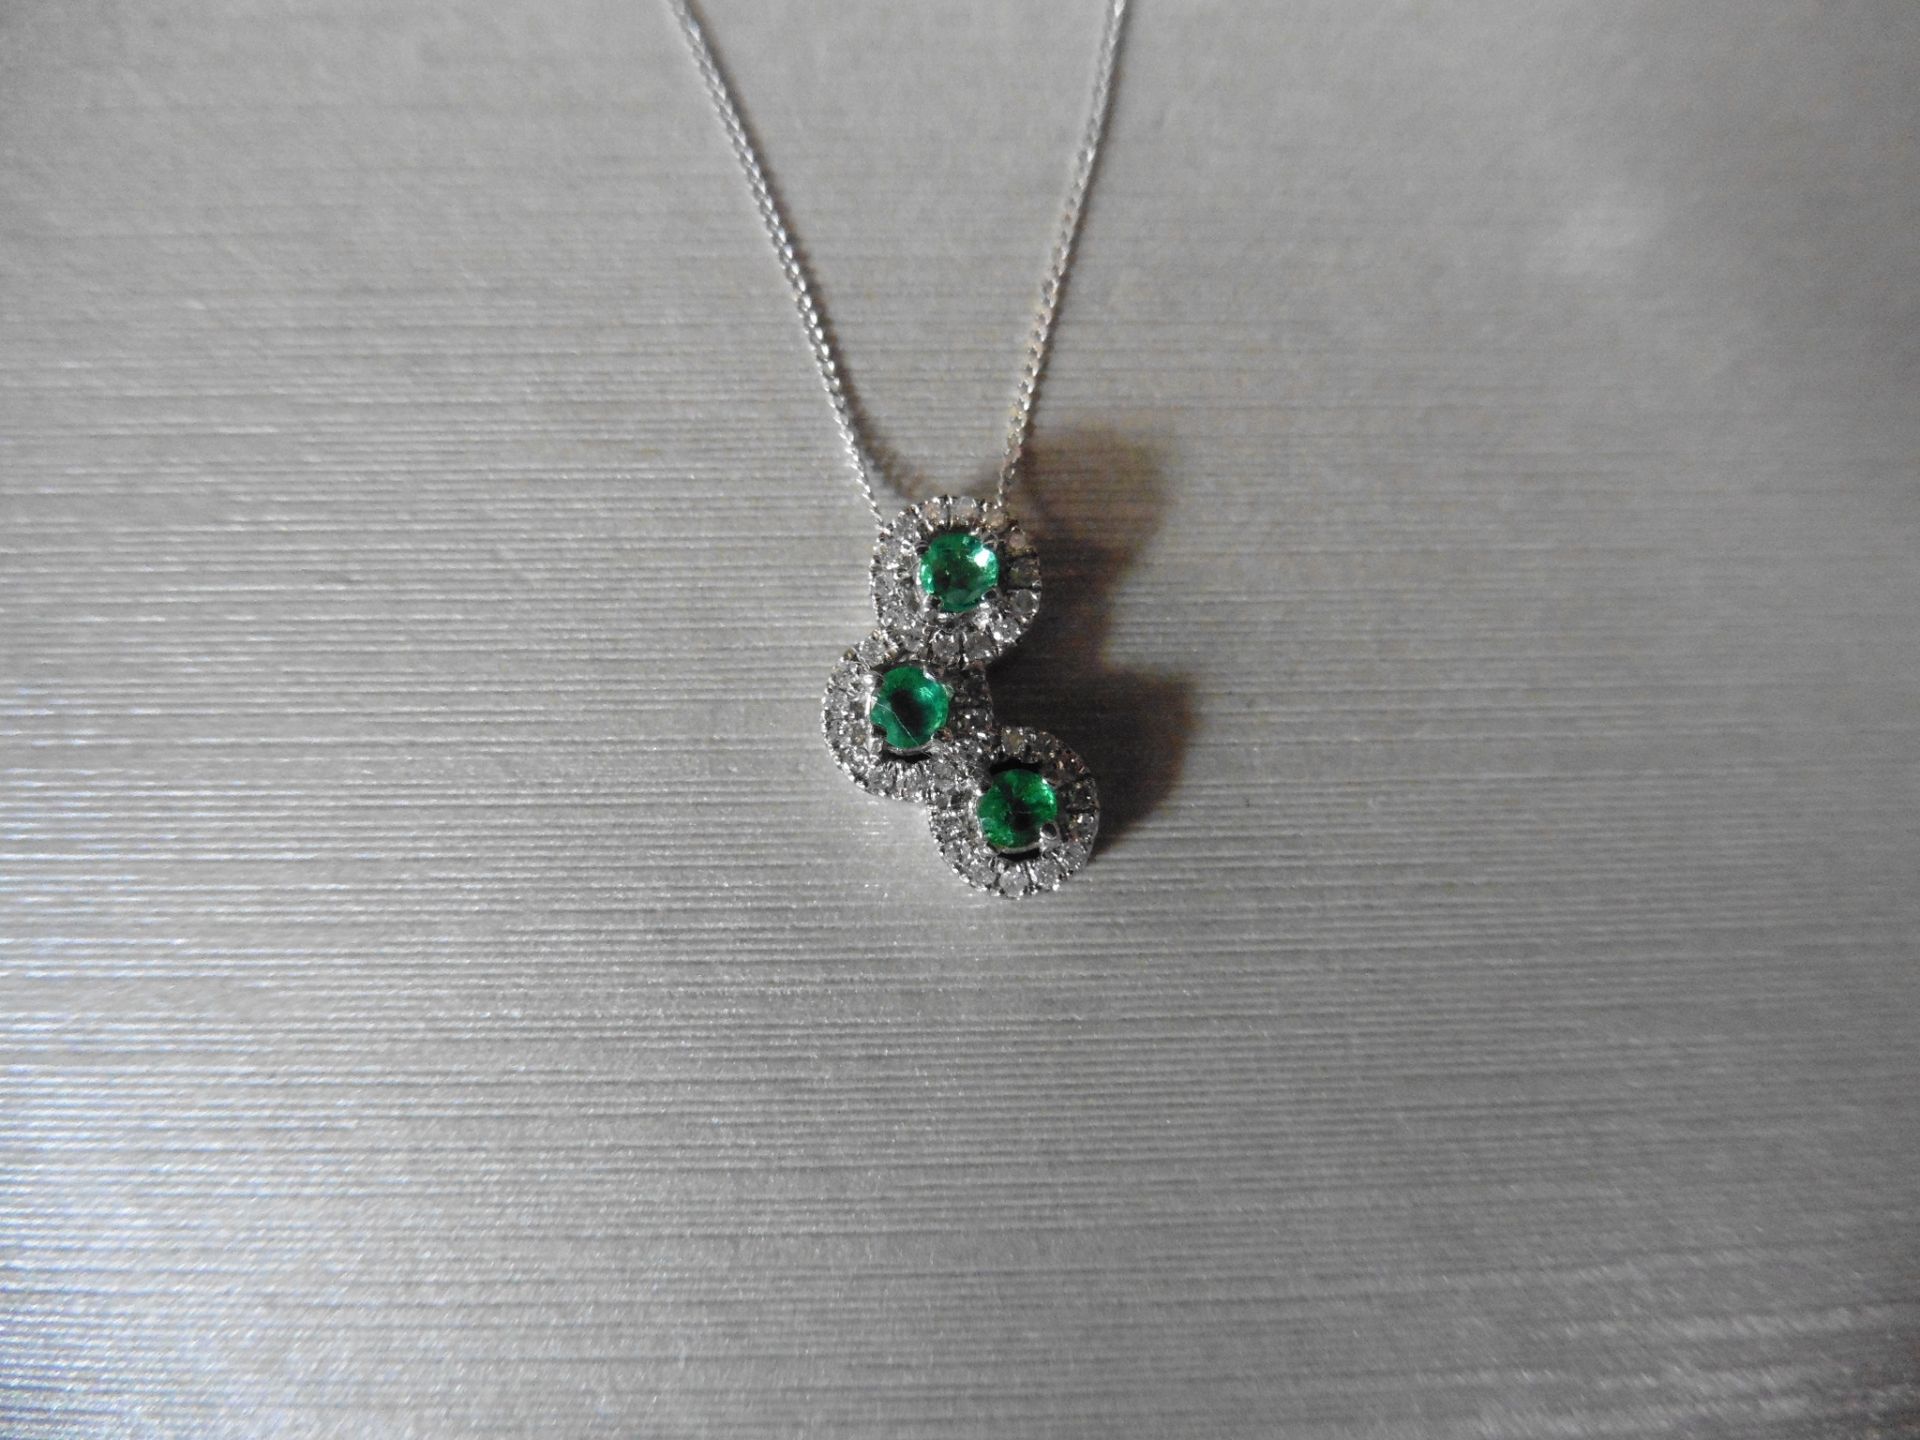 0.35ct diamond set halo trilogy style pendant. 3 centred emeralds 0.17ct total with halo setting 0.